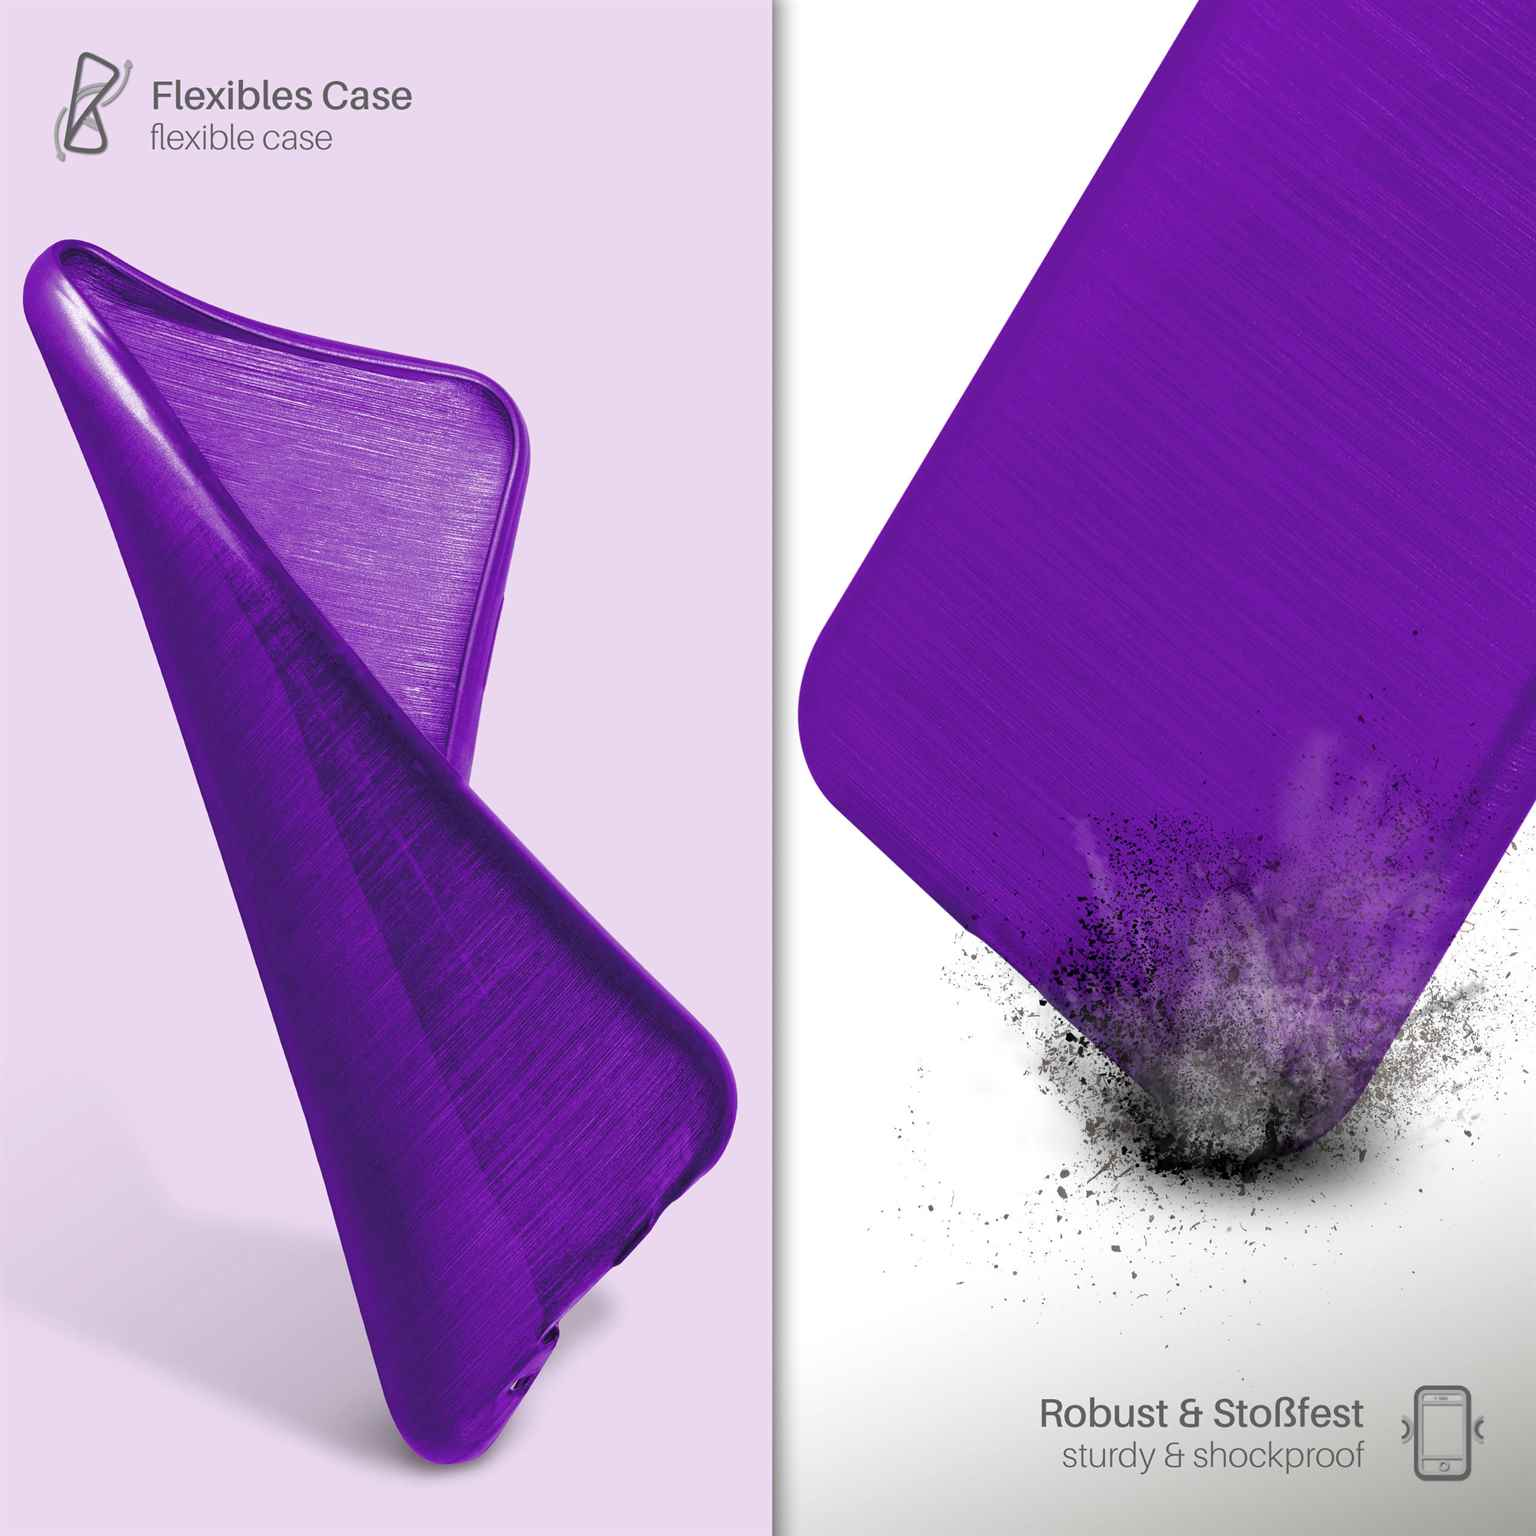 MOEX Brushed Case, Purpure-Purple Apple, X, Backcover, iPhone